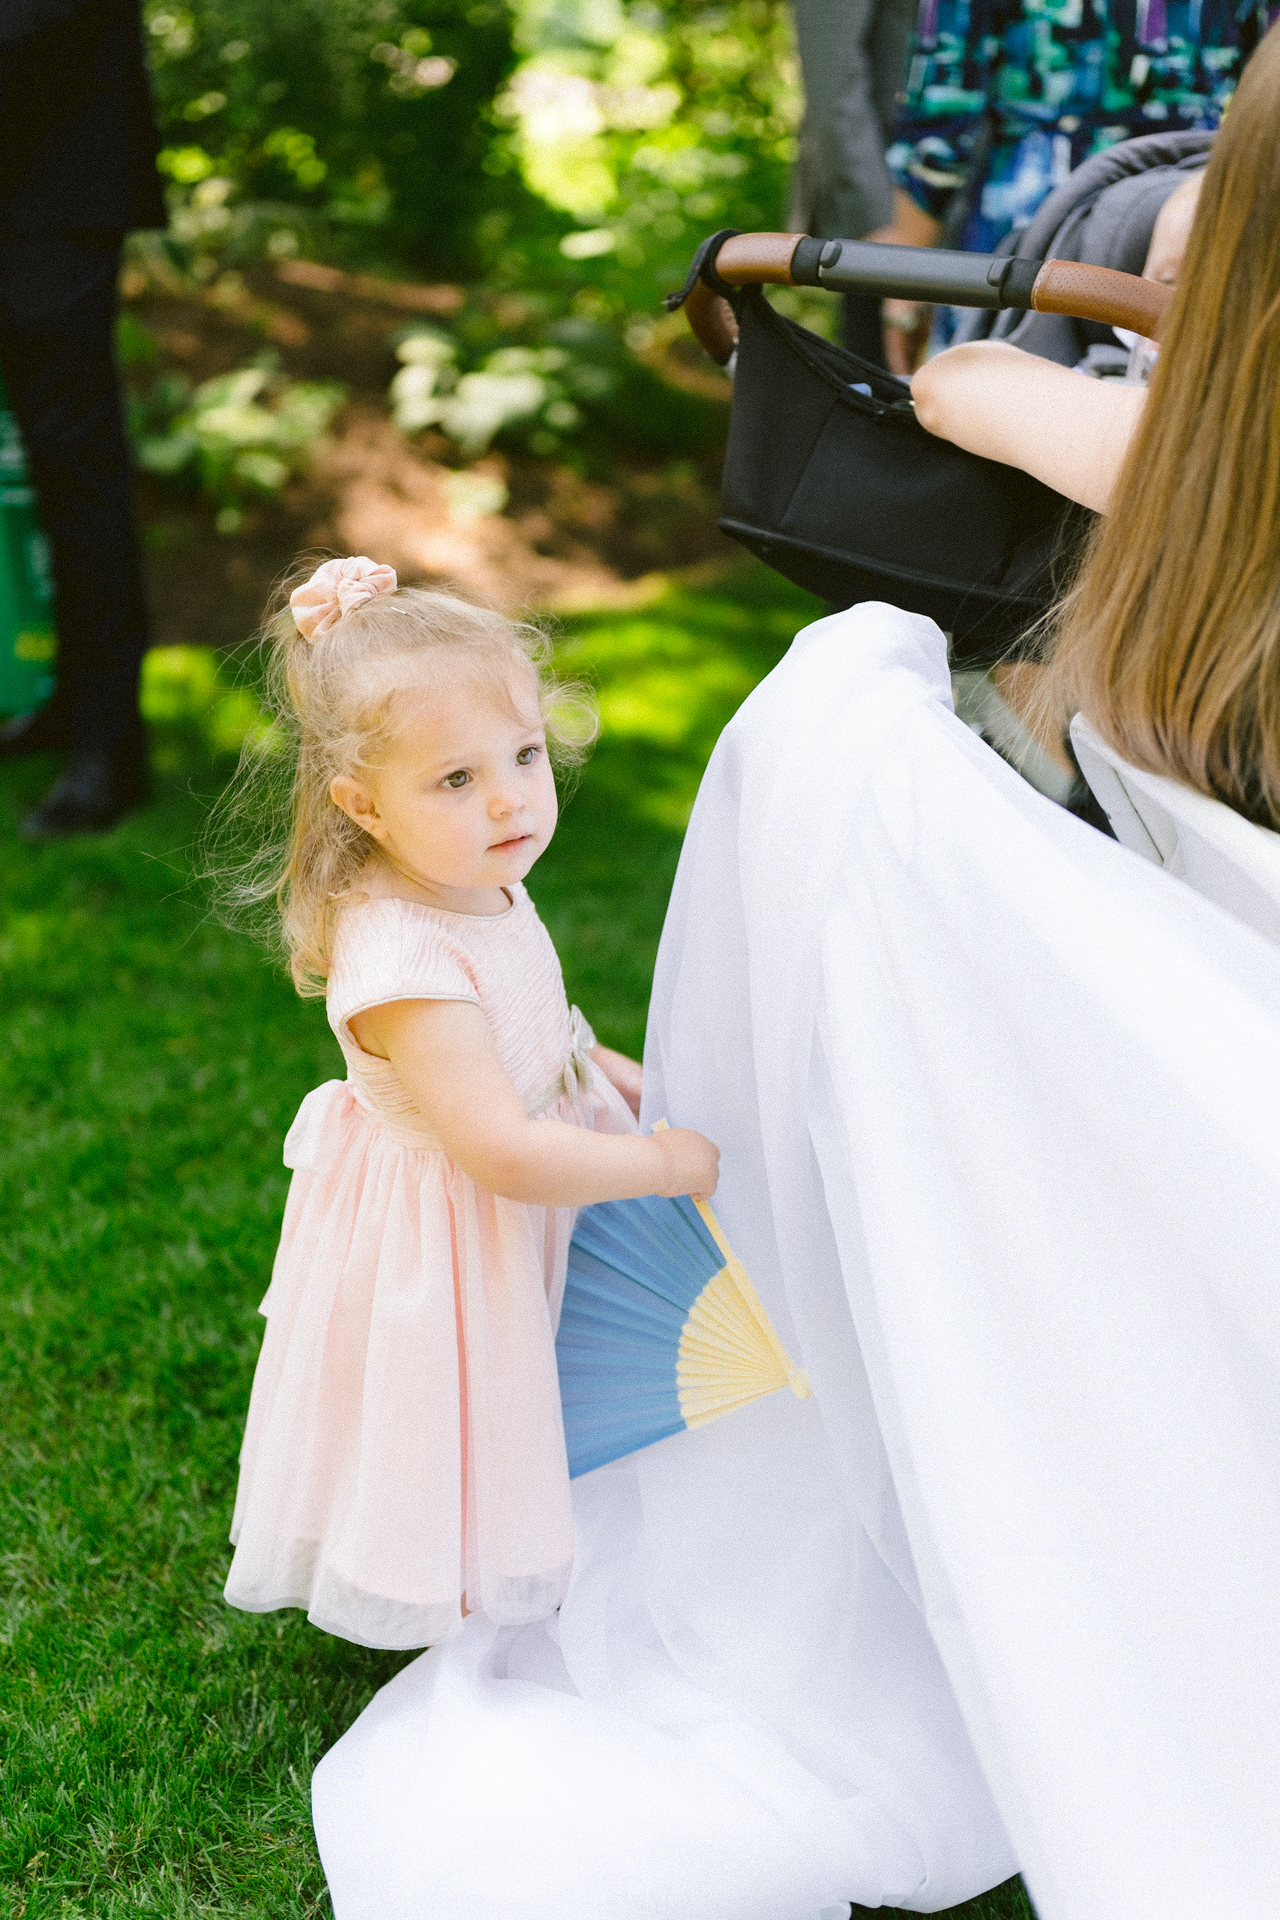 A young child in a pink dress curiously examines the white fabric of a dress at an outdoor gathering.